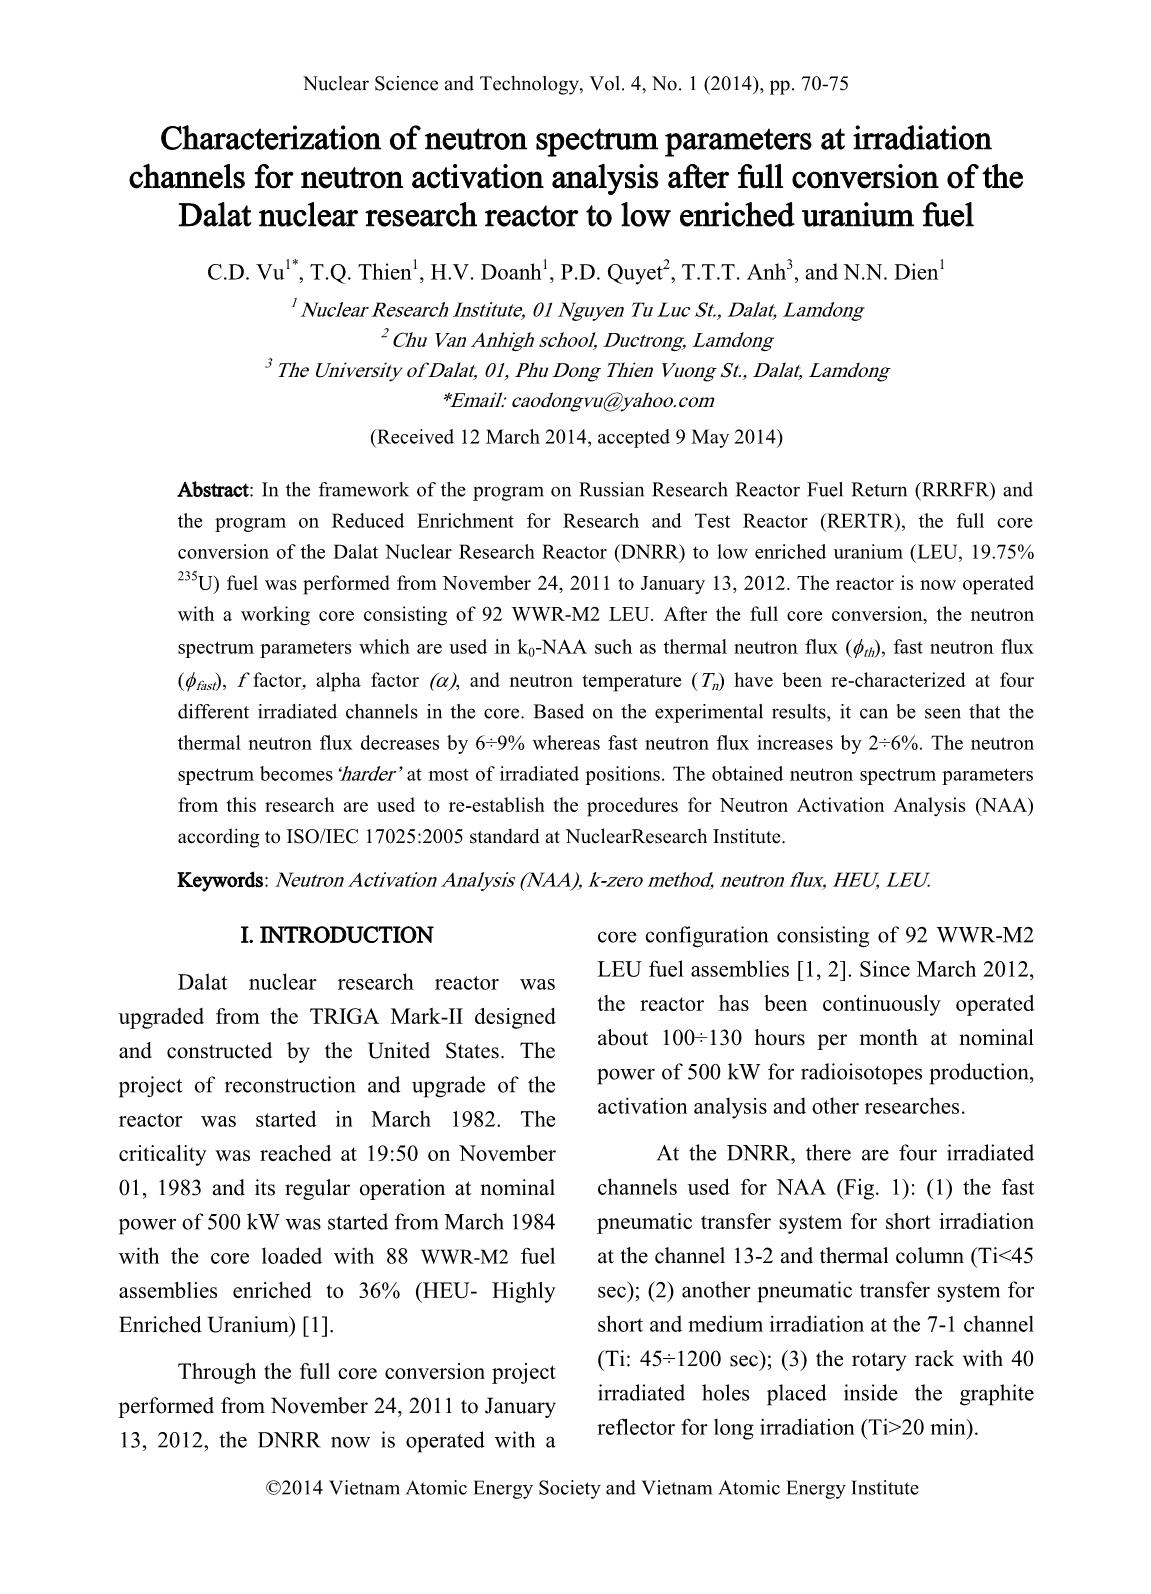 Characterization of neutron spectrum parameters at irradiation channels for neutron activation analysis after full conversion of the Dalat nuclear research reactor to low enriched uranium fuel trang 1